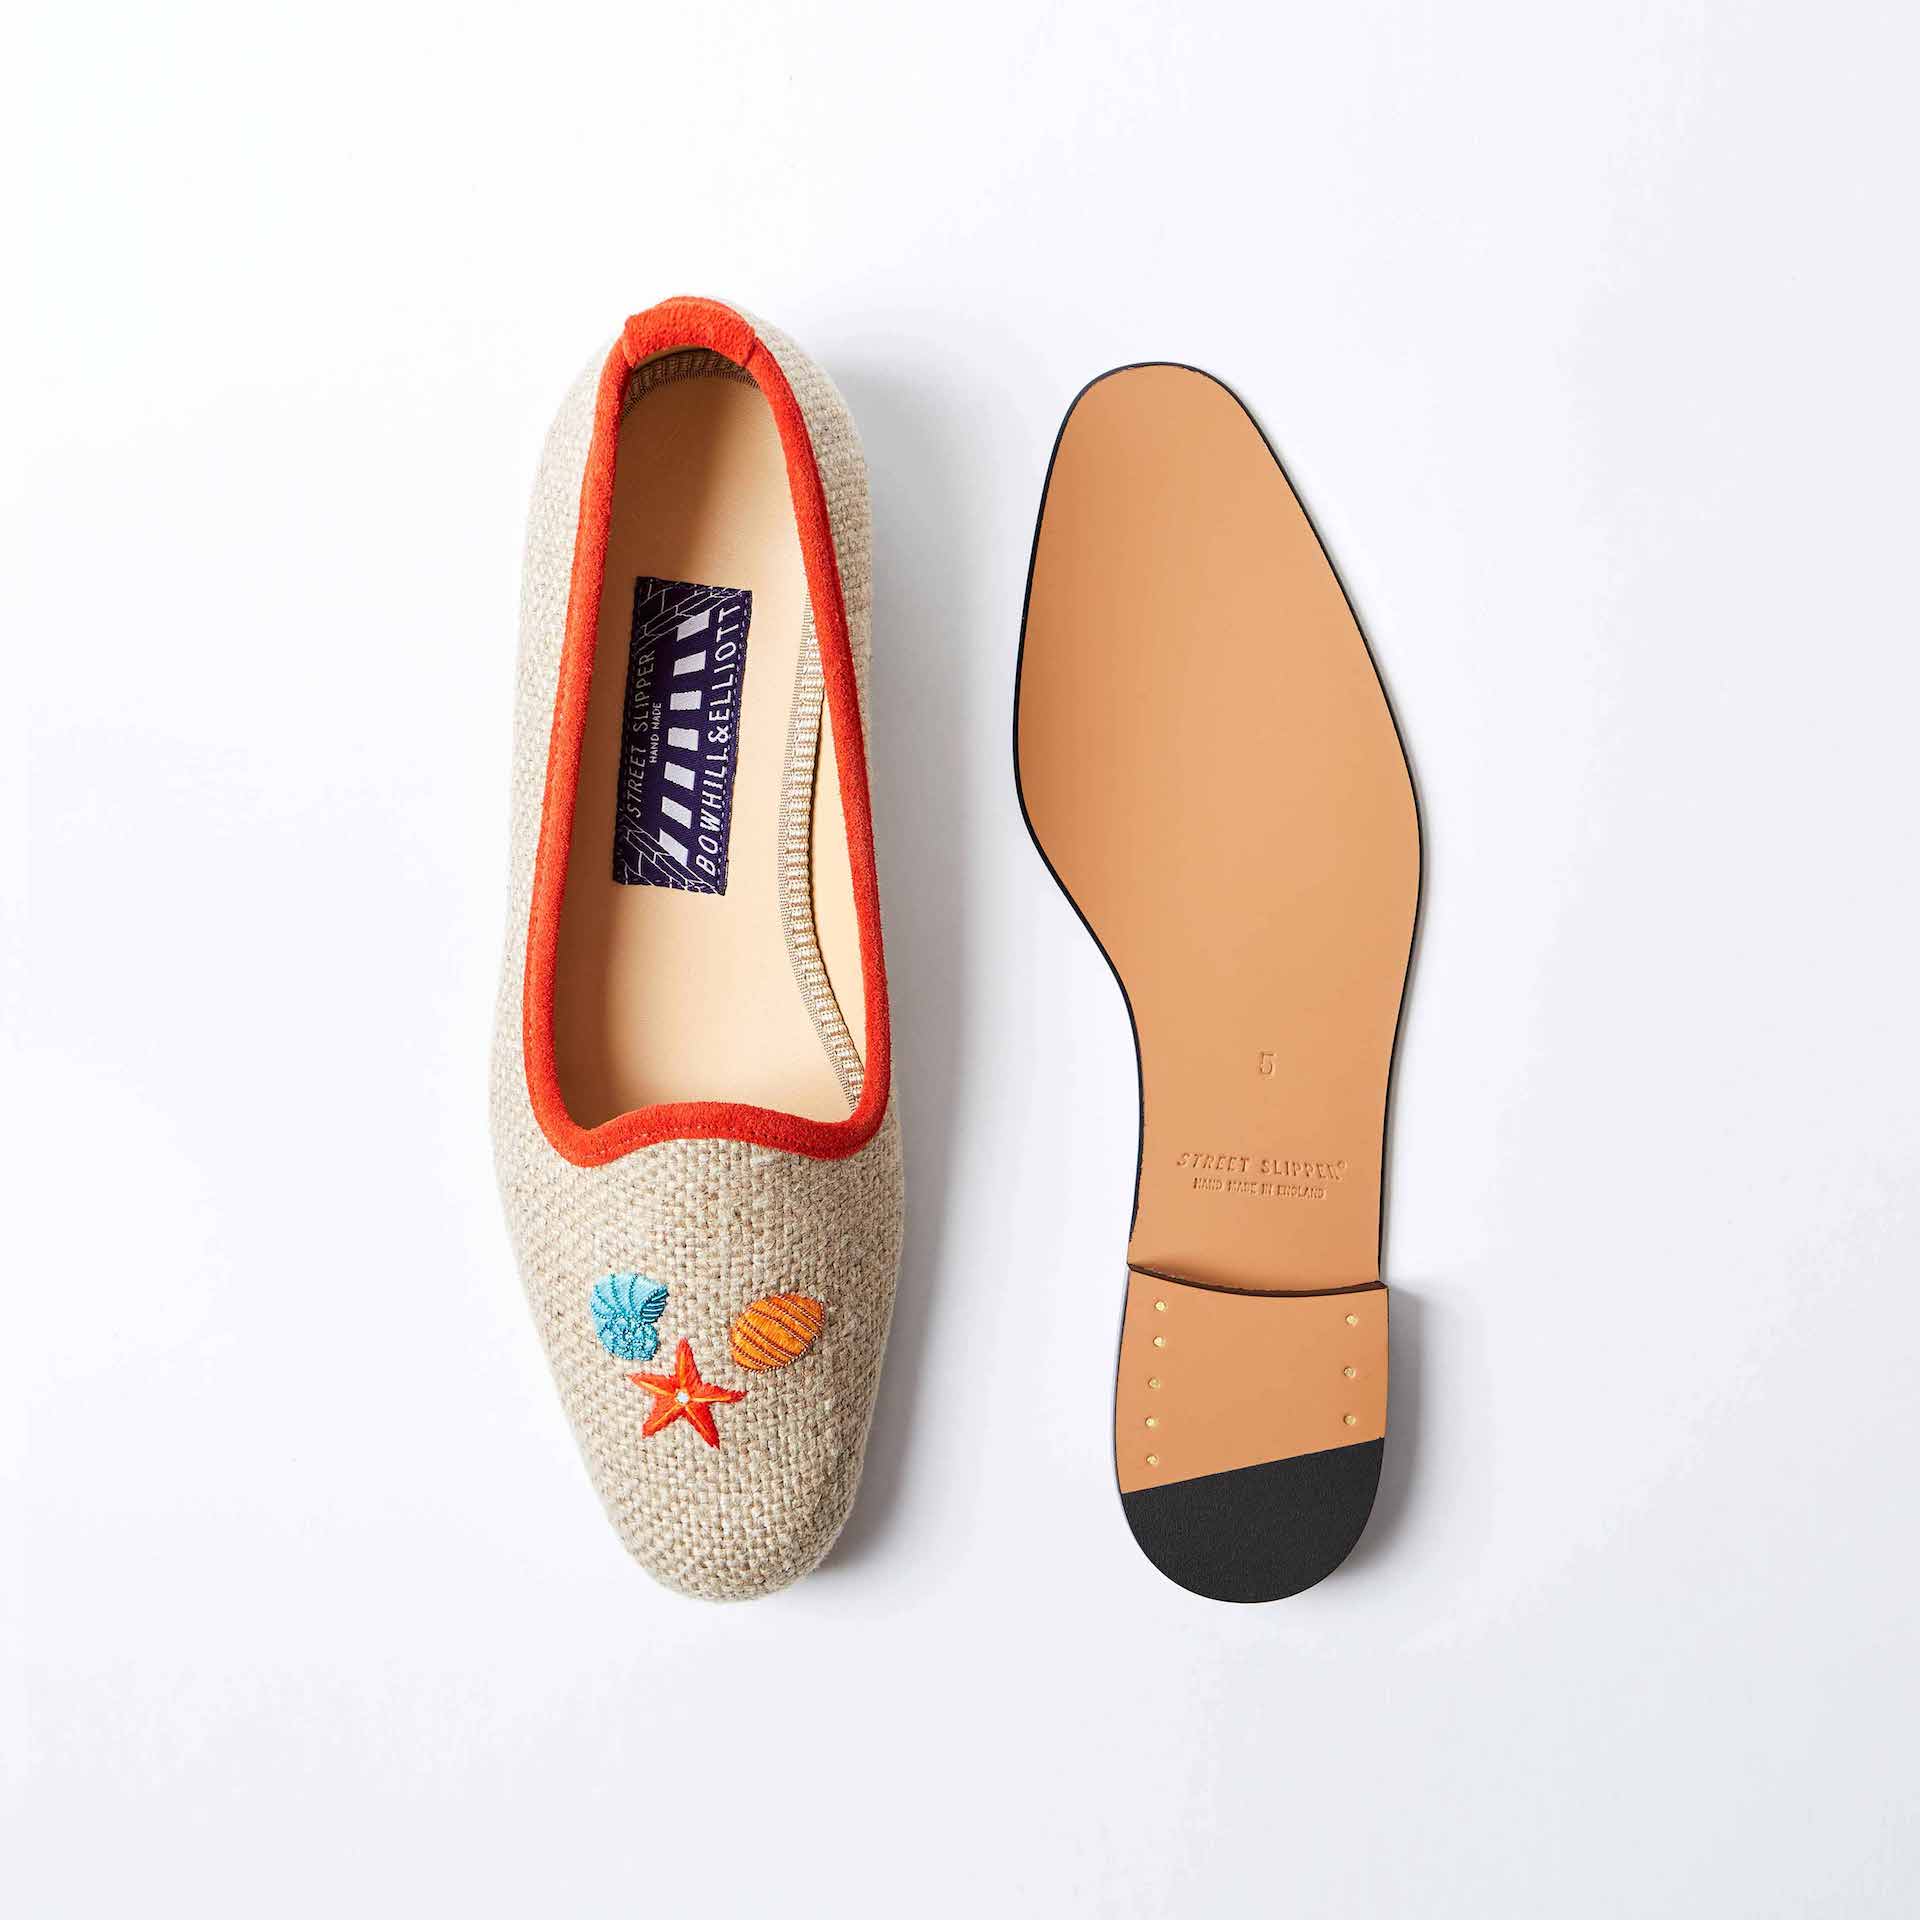 Oatmeal Linen Pumps with Embroidered Sea Shells